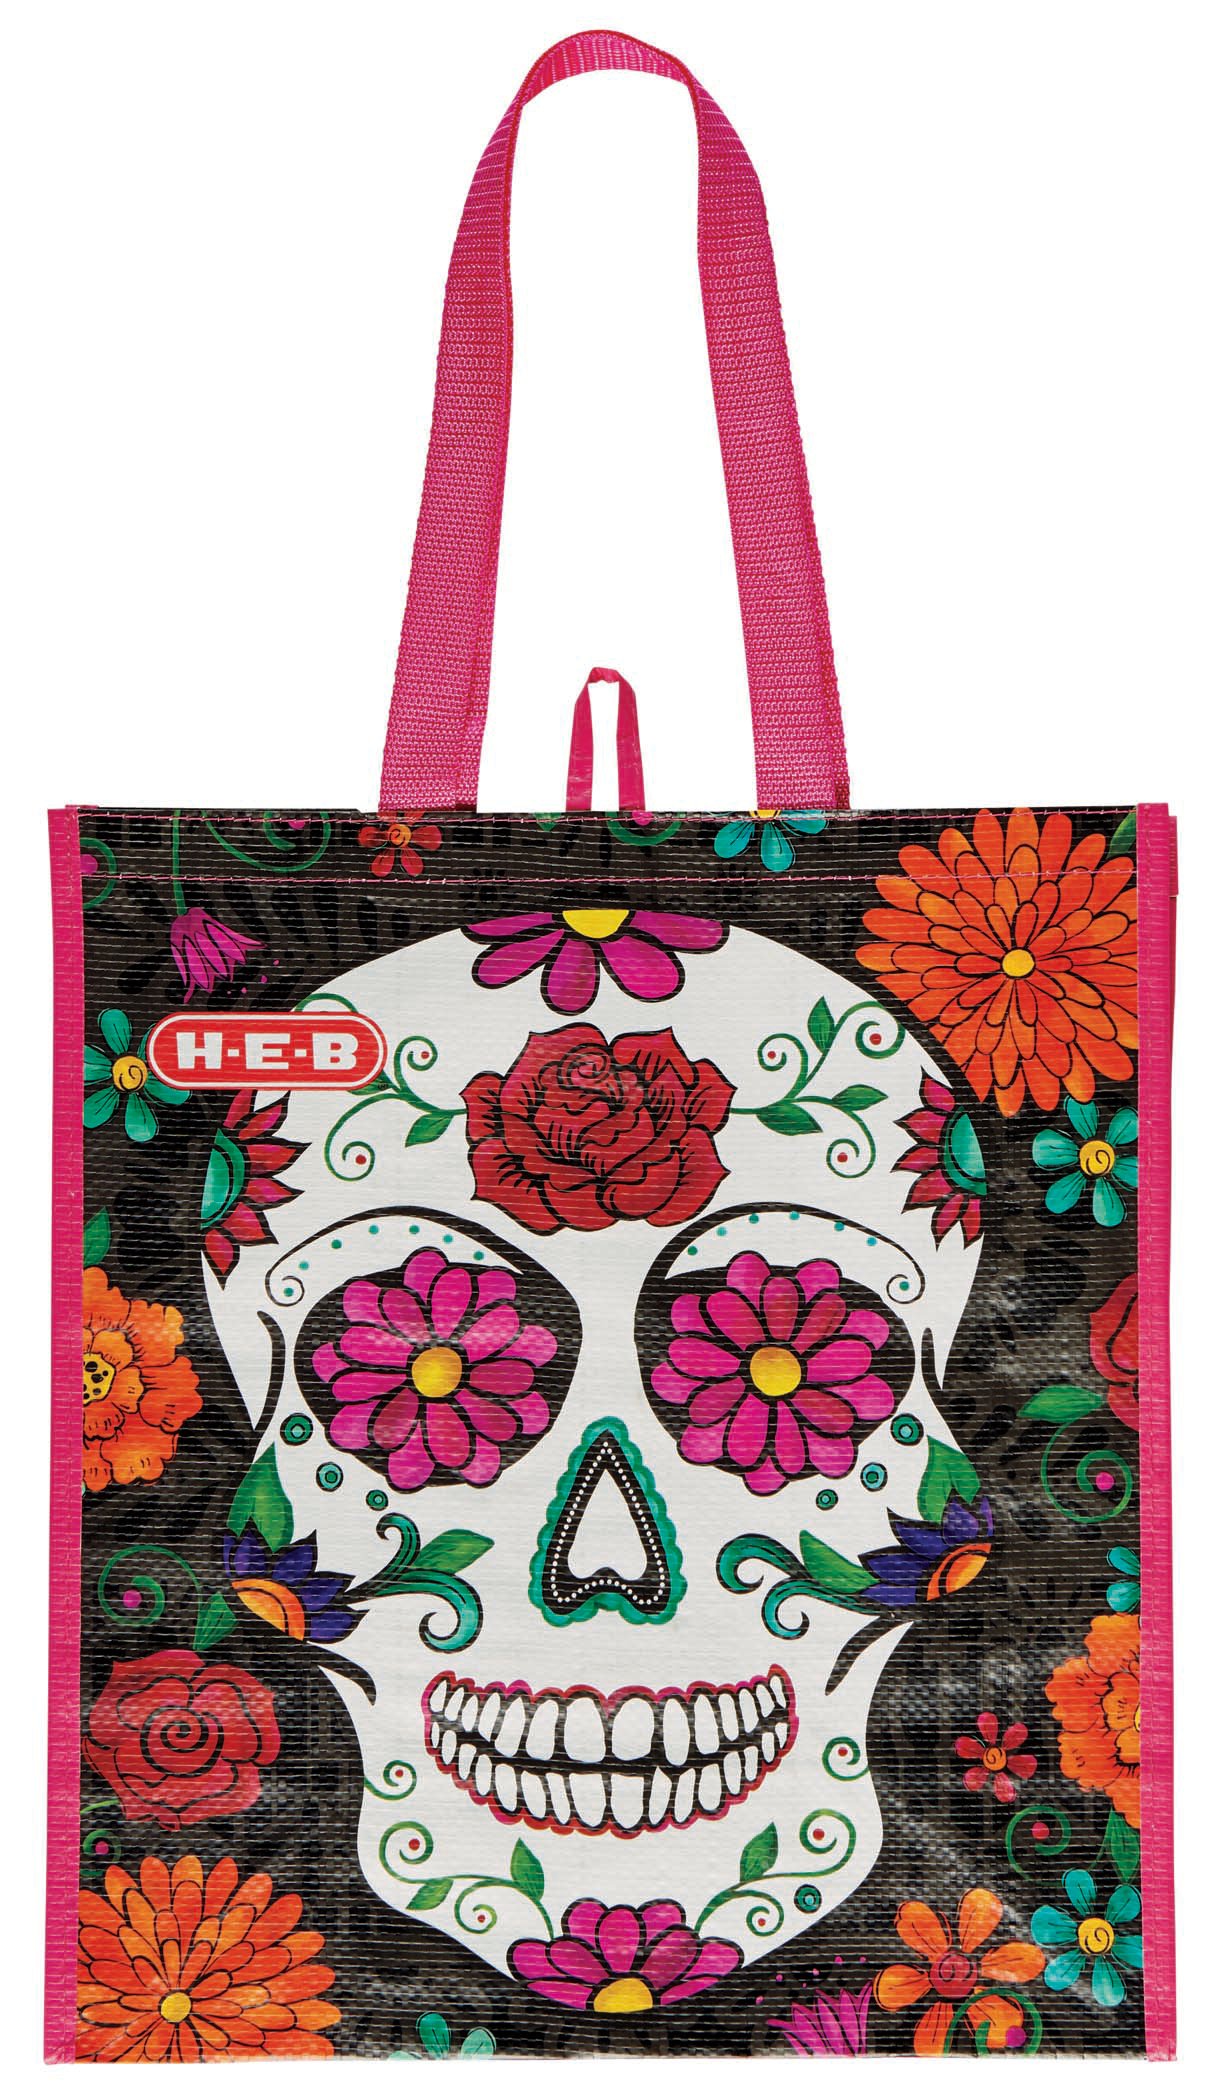 H-E-B Reusable Bags Day Of The Dead Limited Edition Bags 